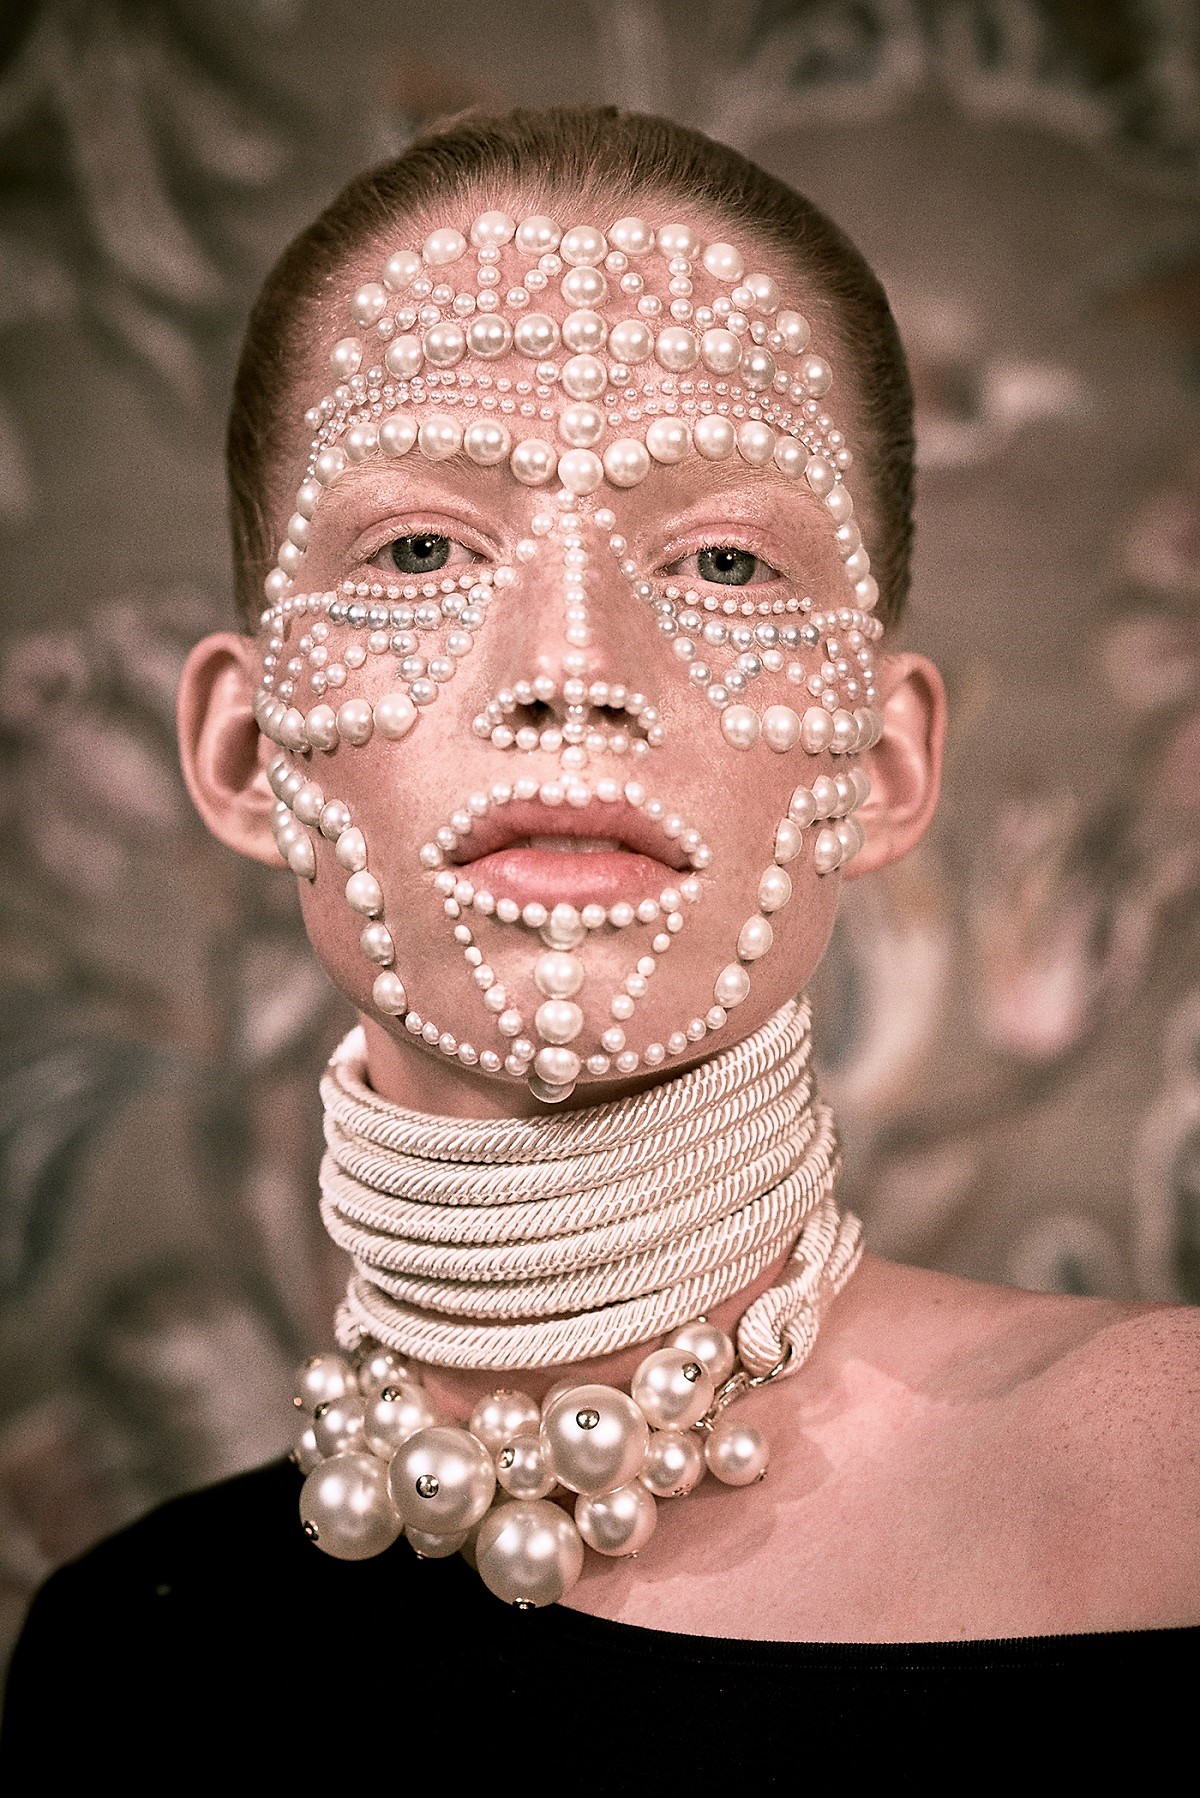 Image: Elizaveta Porodina photography project for Lotte//TextilWirtschaft showing the portrait of a model with buttons on her face to create a design, is an important example of her fashion and fine art photography